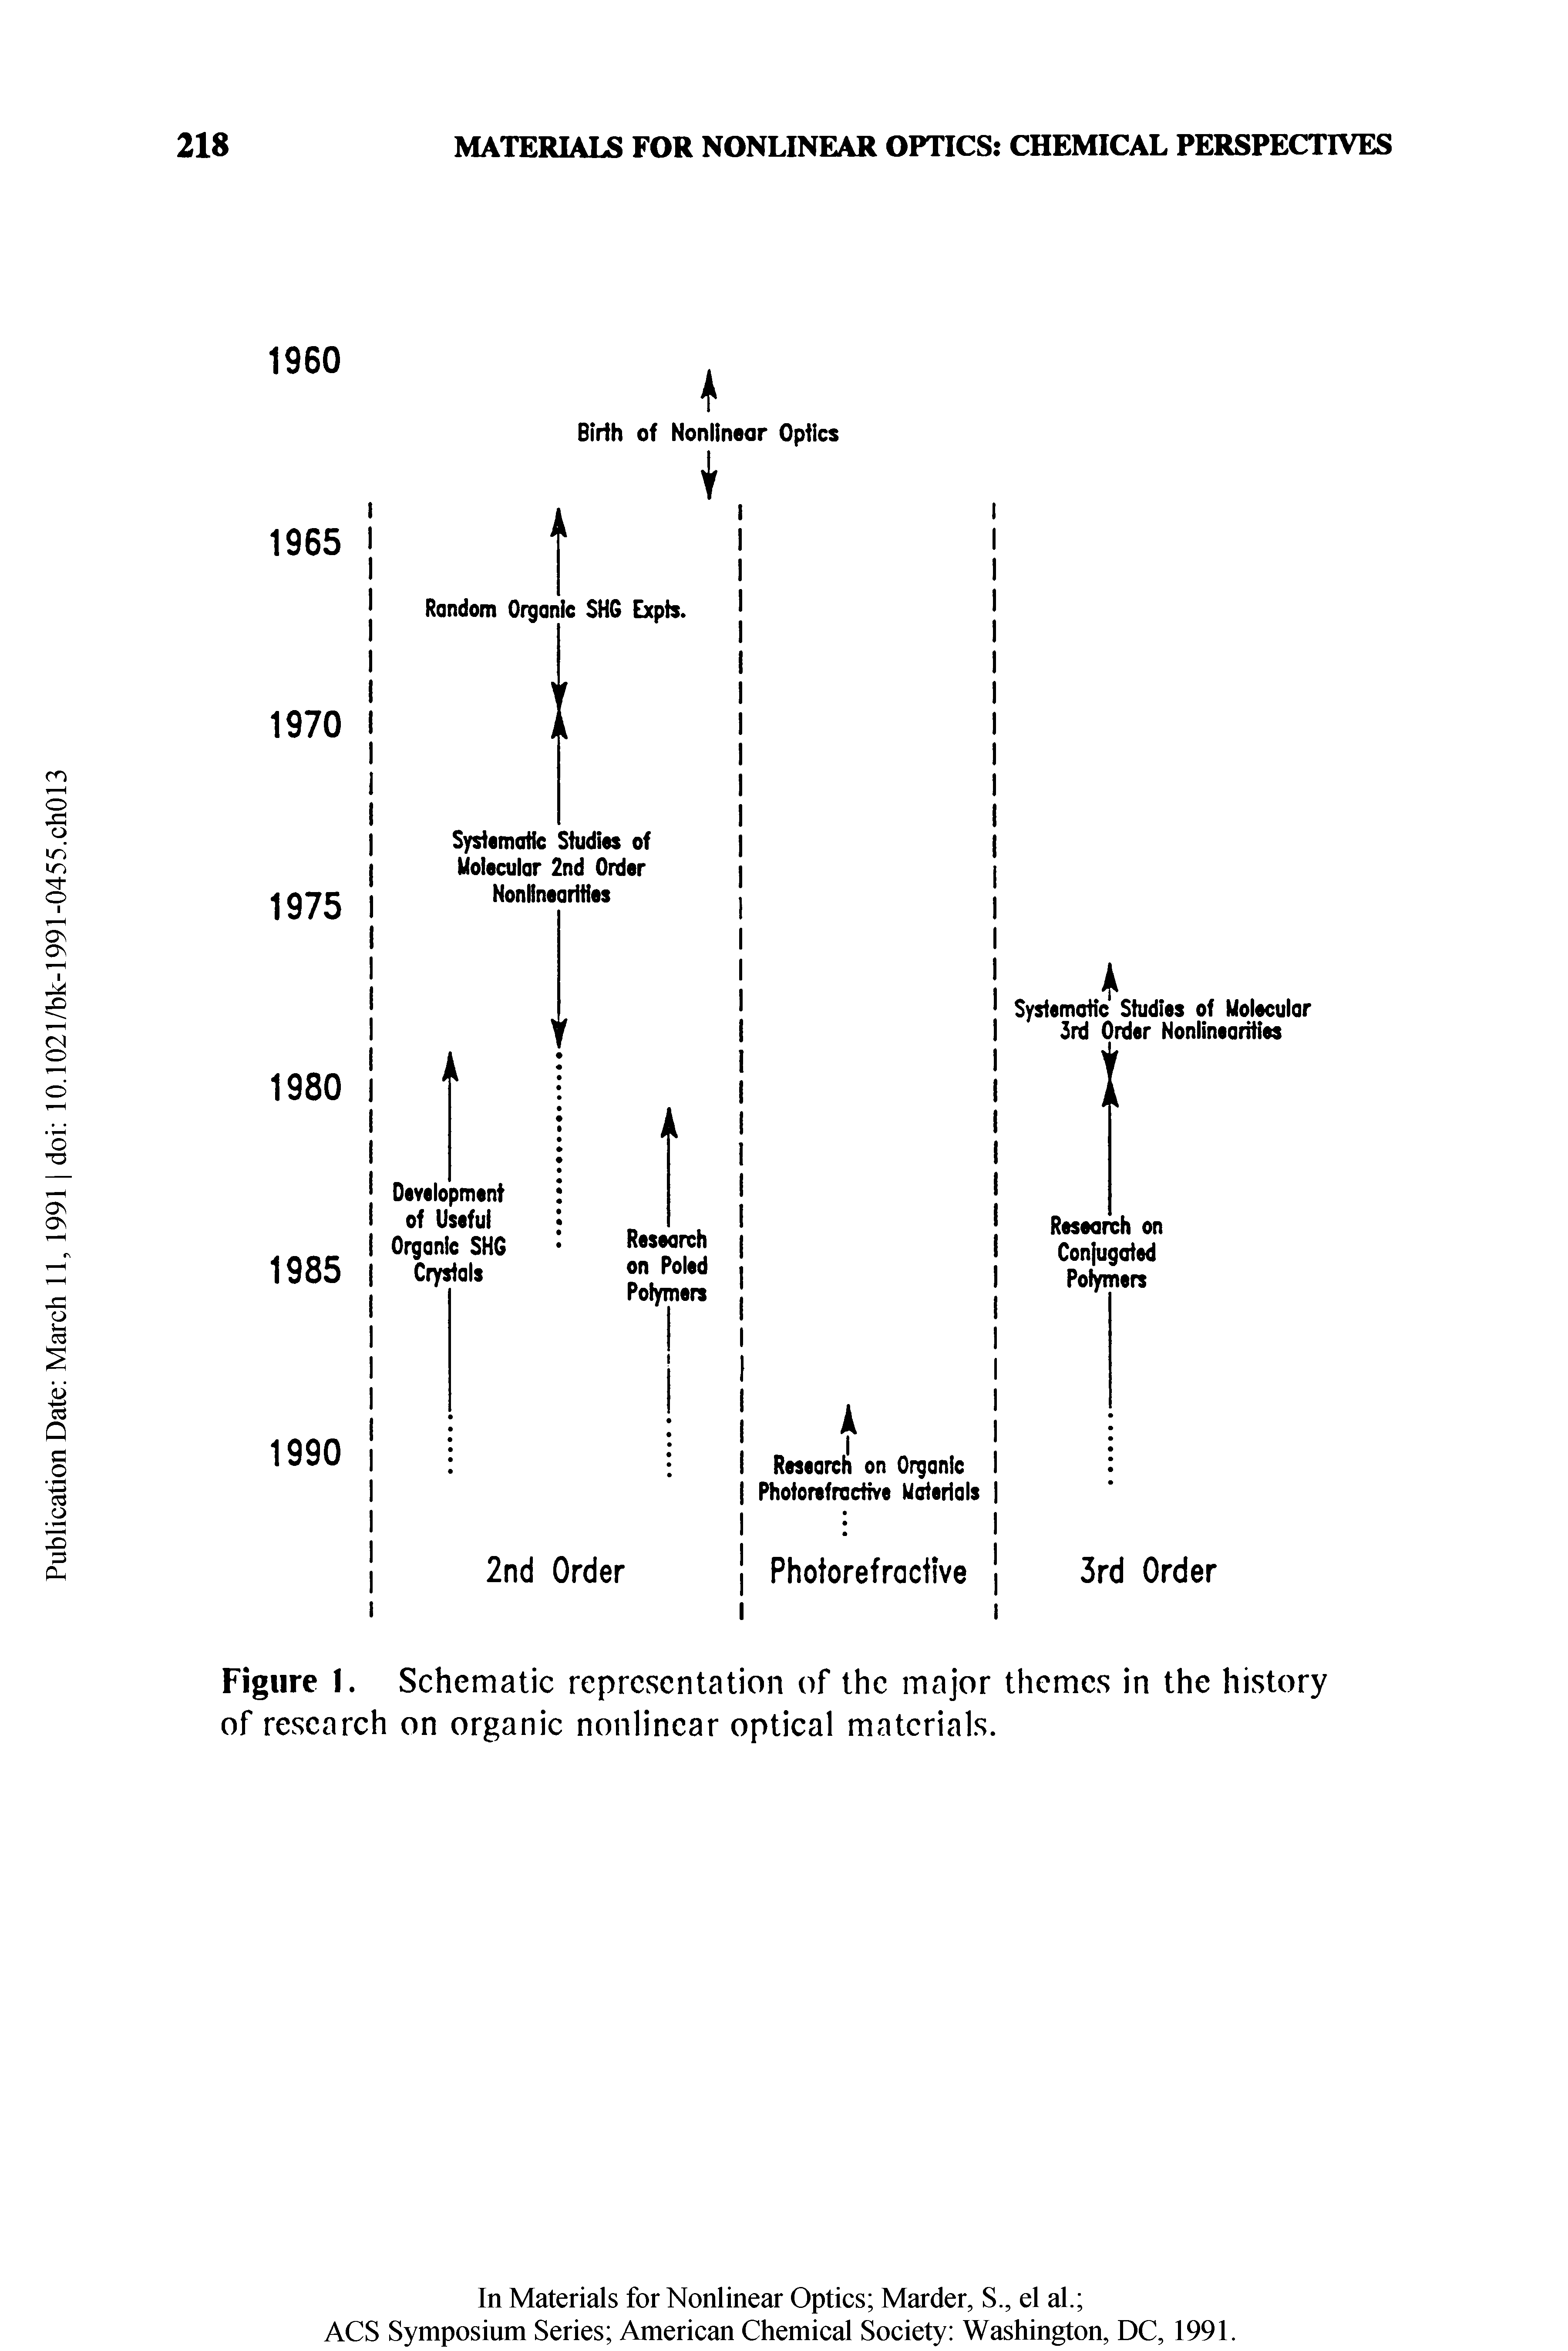 Figure 1. Schematic representation of the major themes in the history of research on organic nonlinear optical materials.